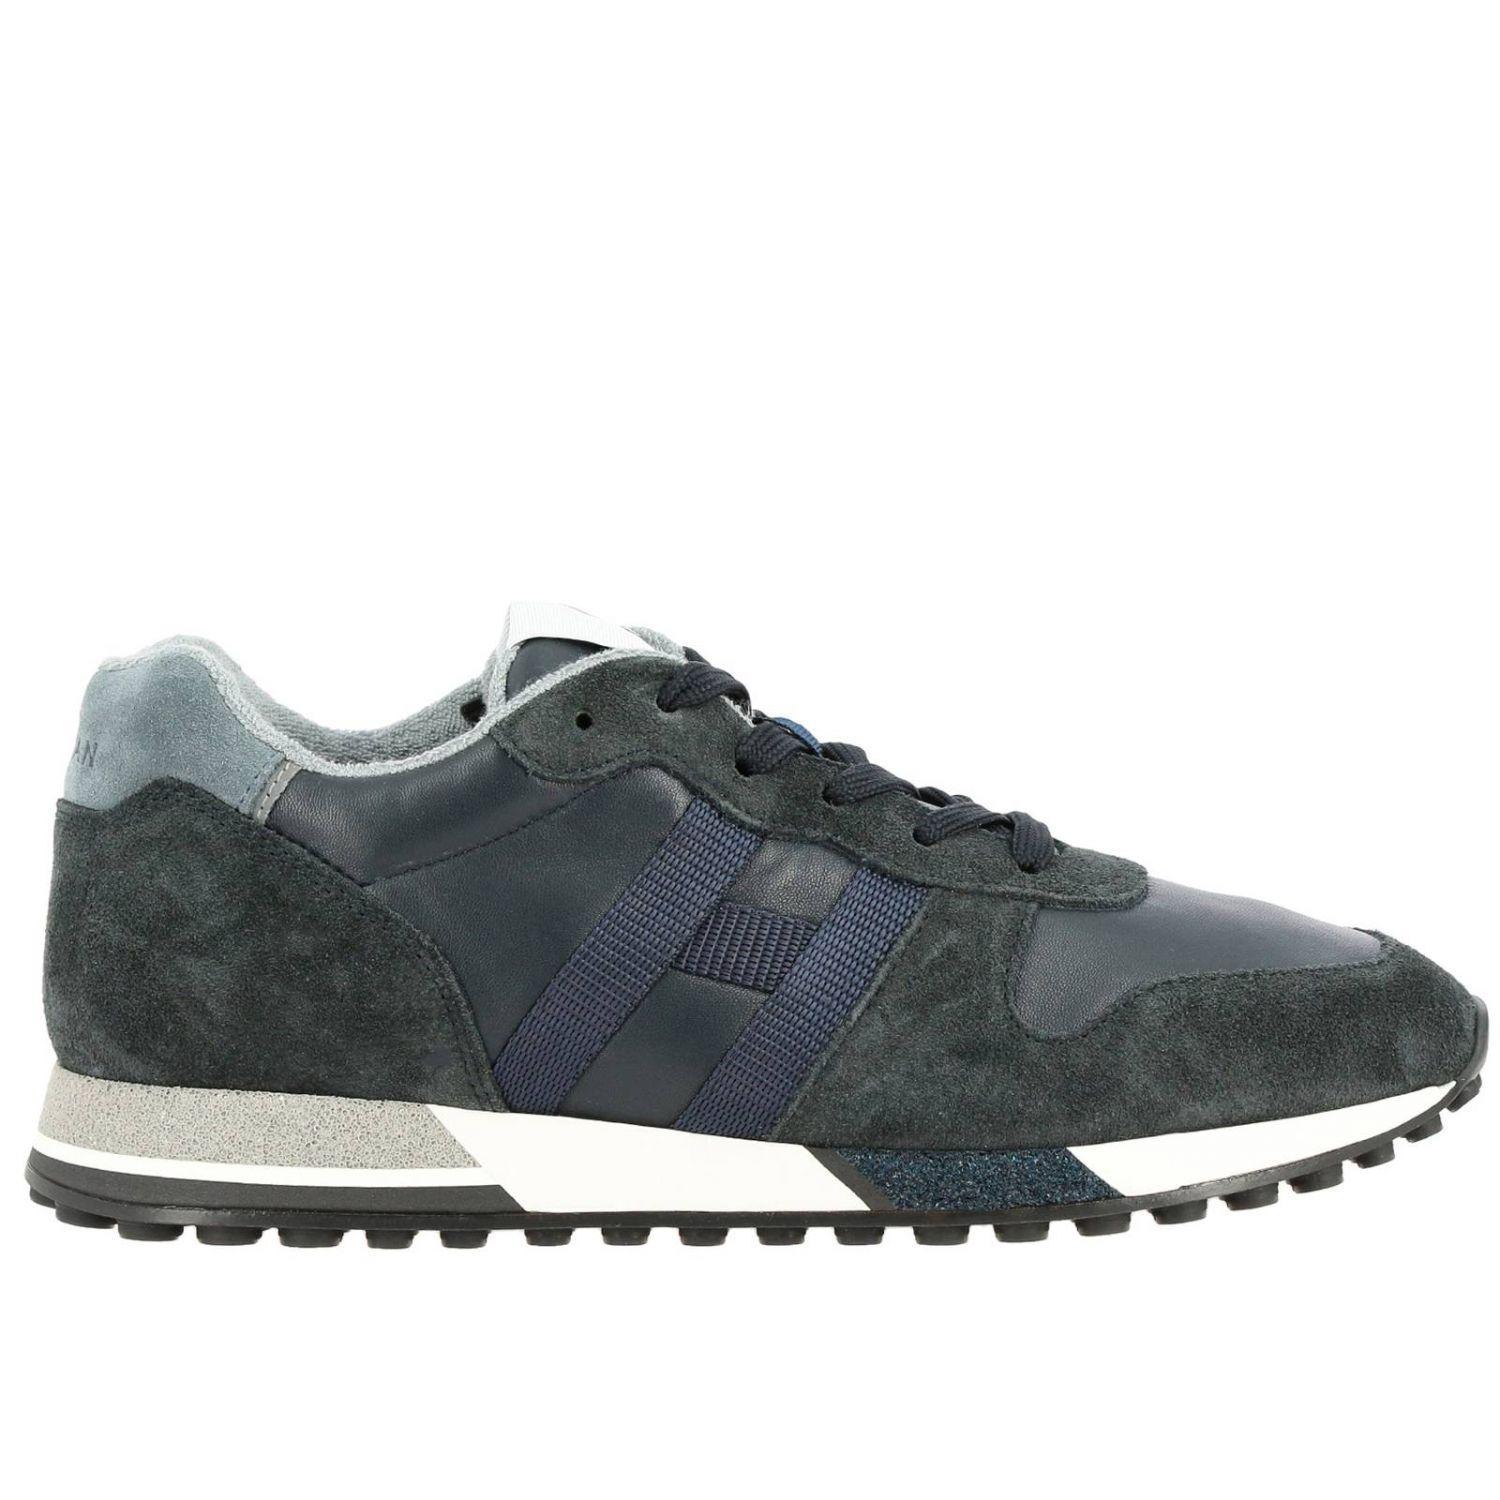 Hogan Sneakers 383 Running In Leather And Suede in Blue for Men - Lyst